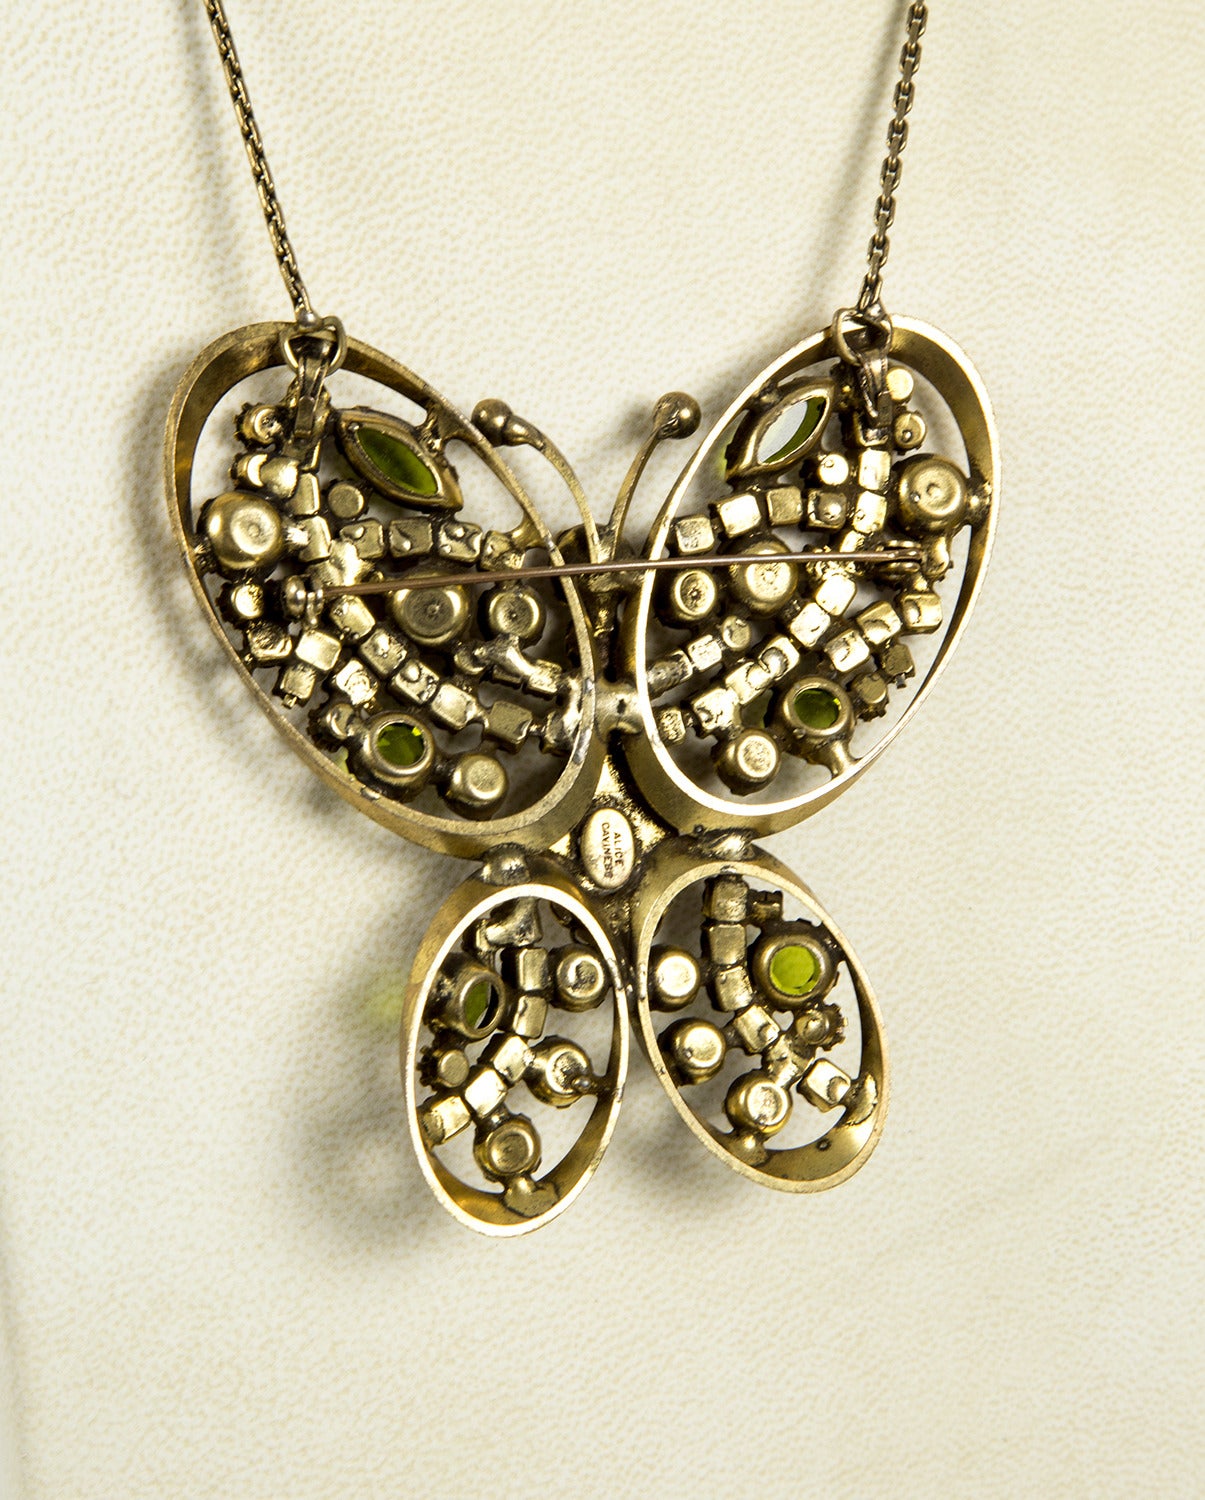 Featuring a Beautiful Butterfly Necklace, also made to be worn as a Brooch, encrusted with faceted Purple, Pink and Green Glass stones; a showy delight of color and contrasts; center set with an oval cabochon stone, incorporating these wonderful